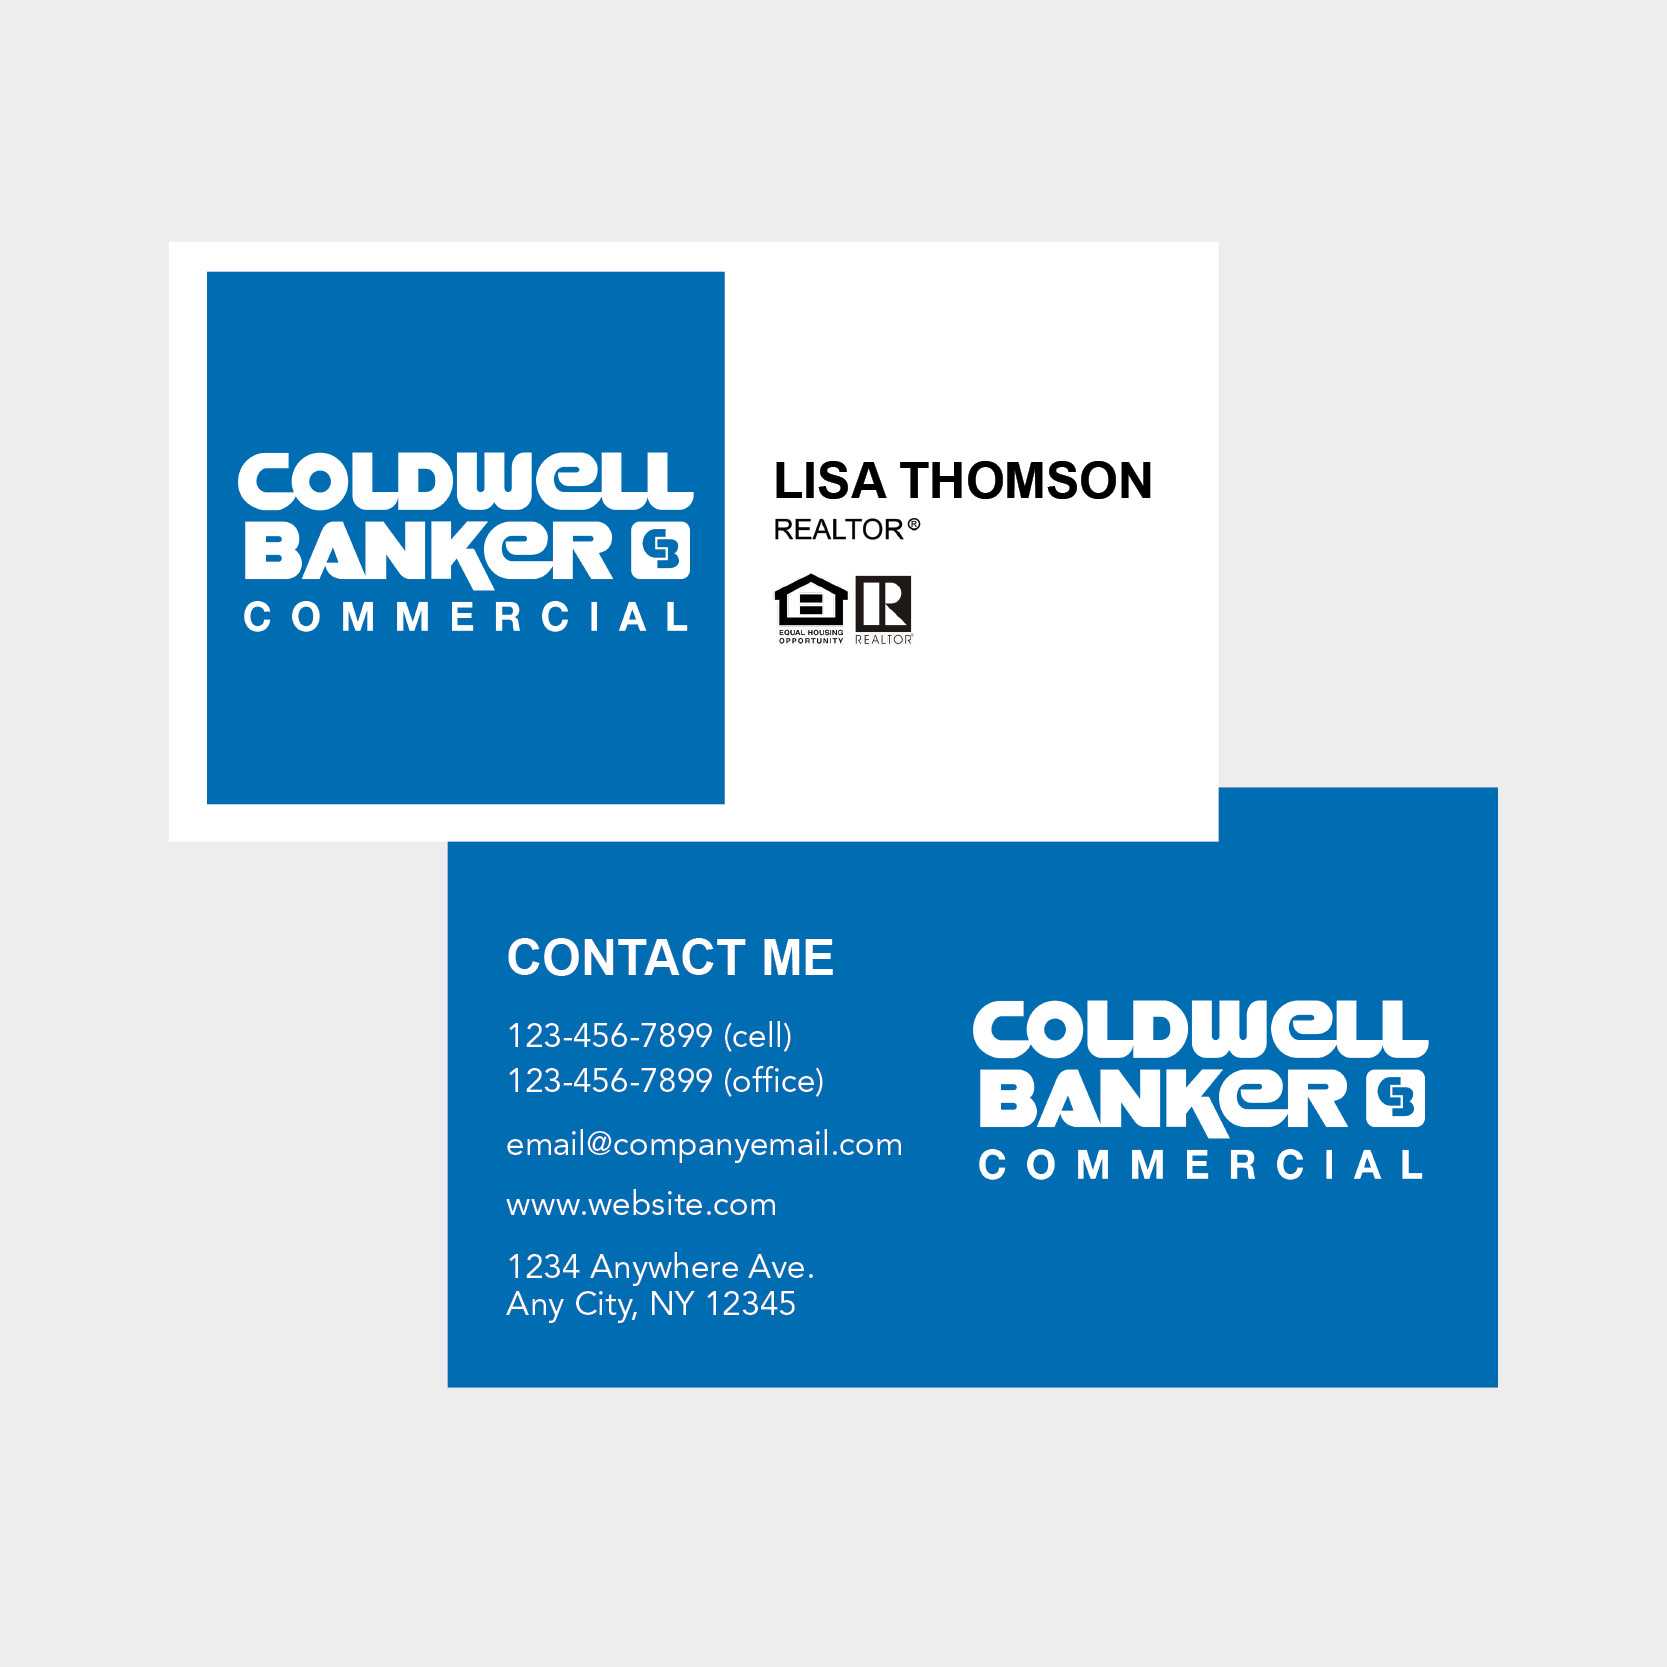 Coldwell Banker Business Cards Regarding Coldwell Banker Business Card Template